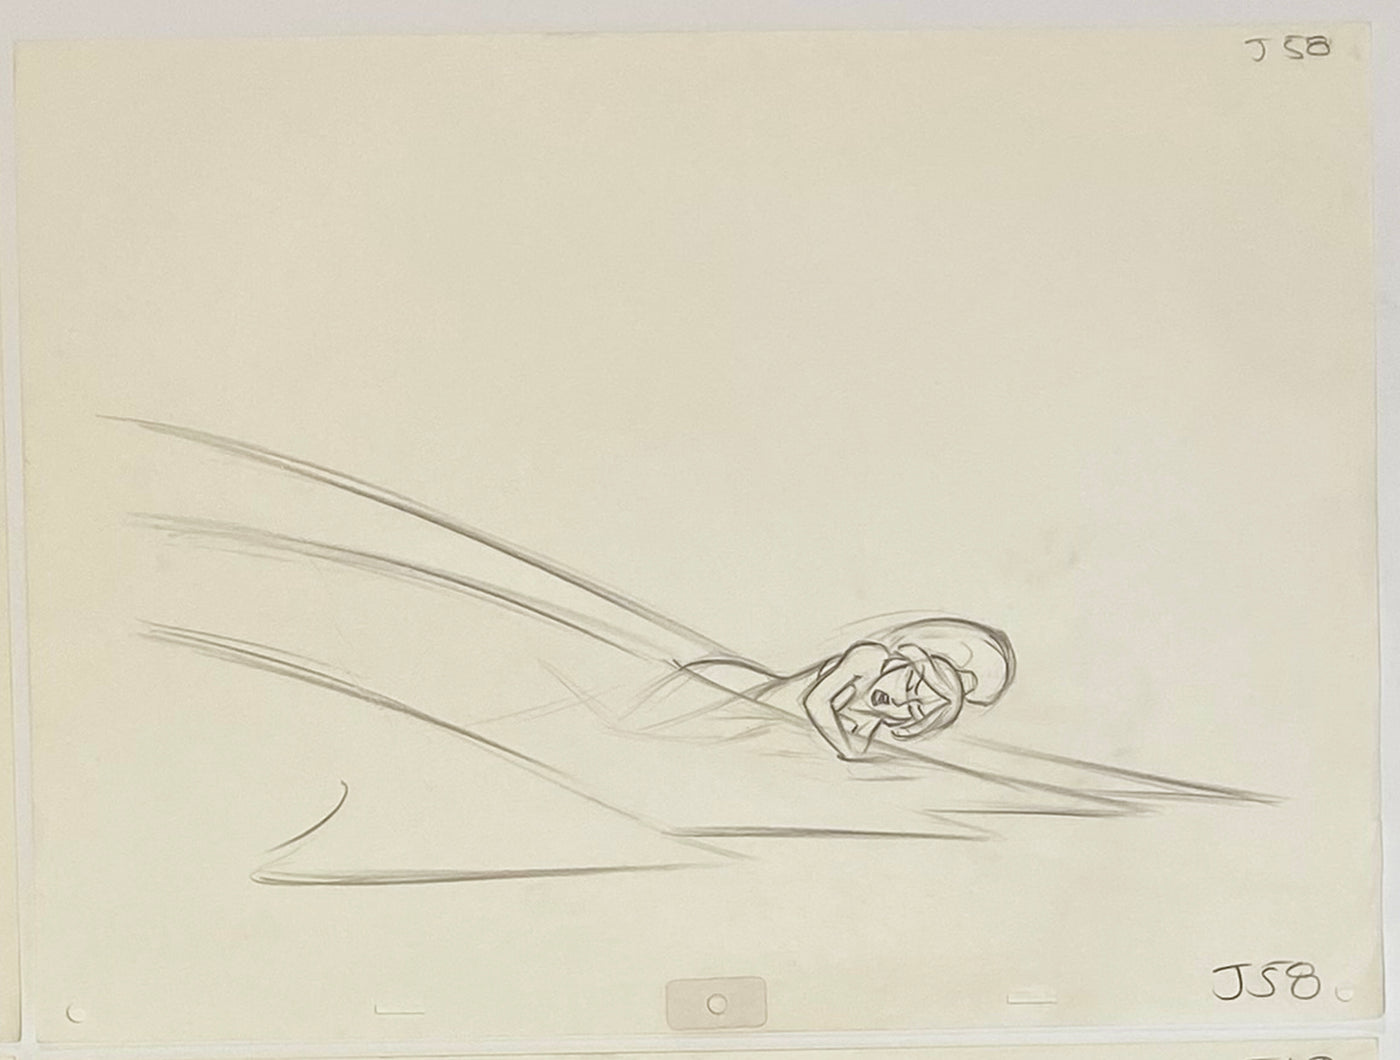 Original Walt Disney Sequence of 4 Production Drawings from Aladdin featuring Jasmine